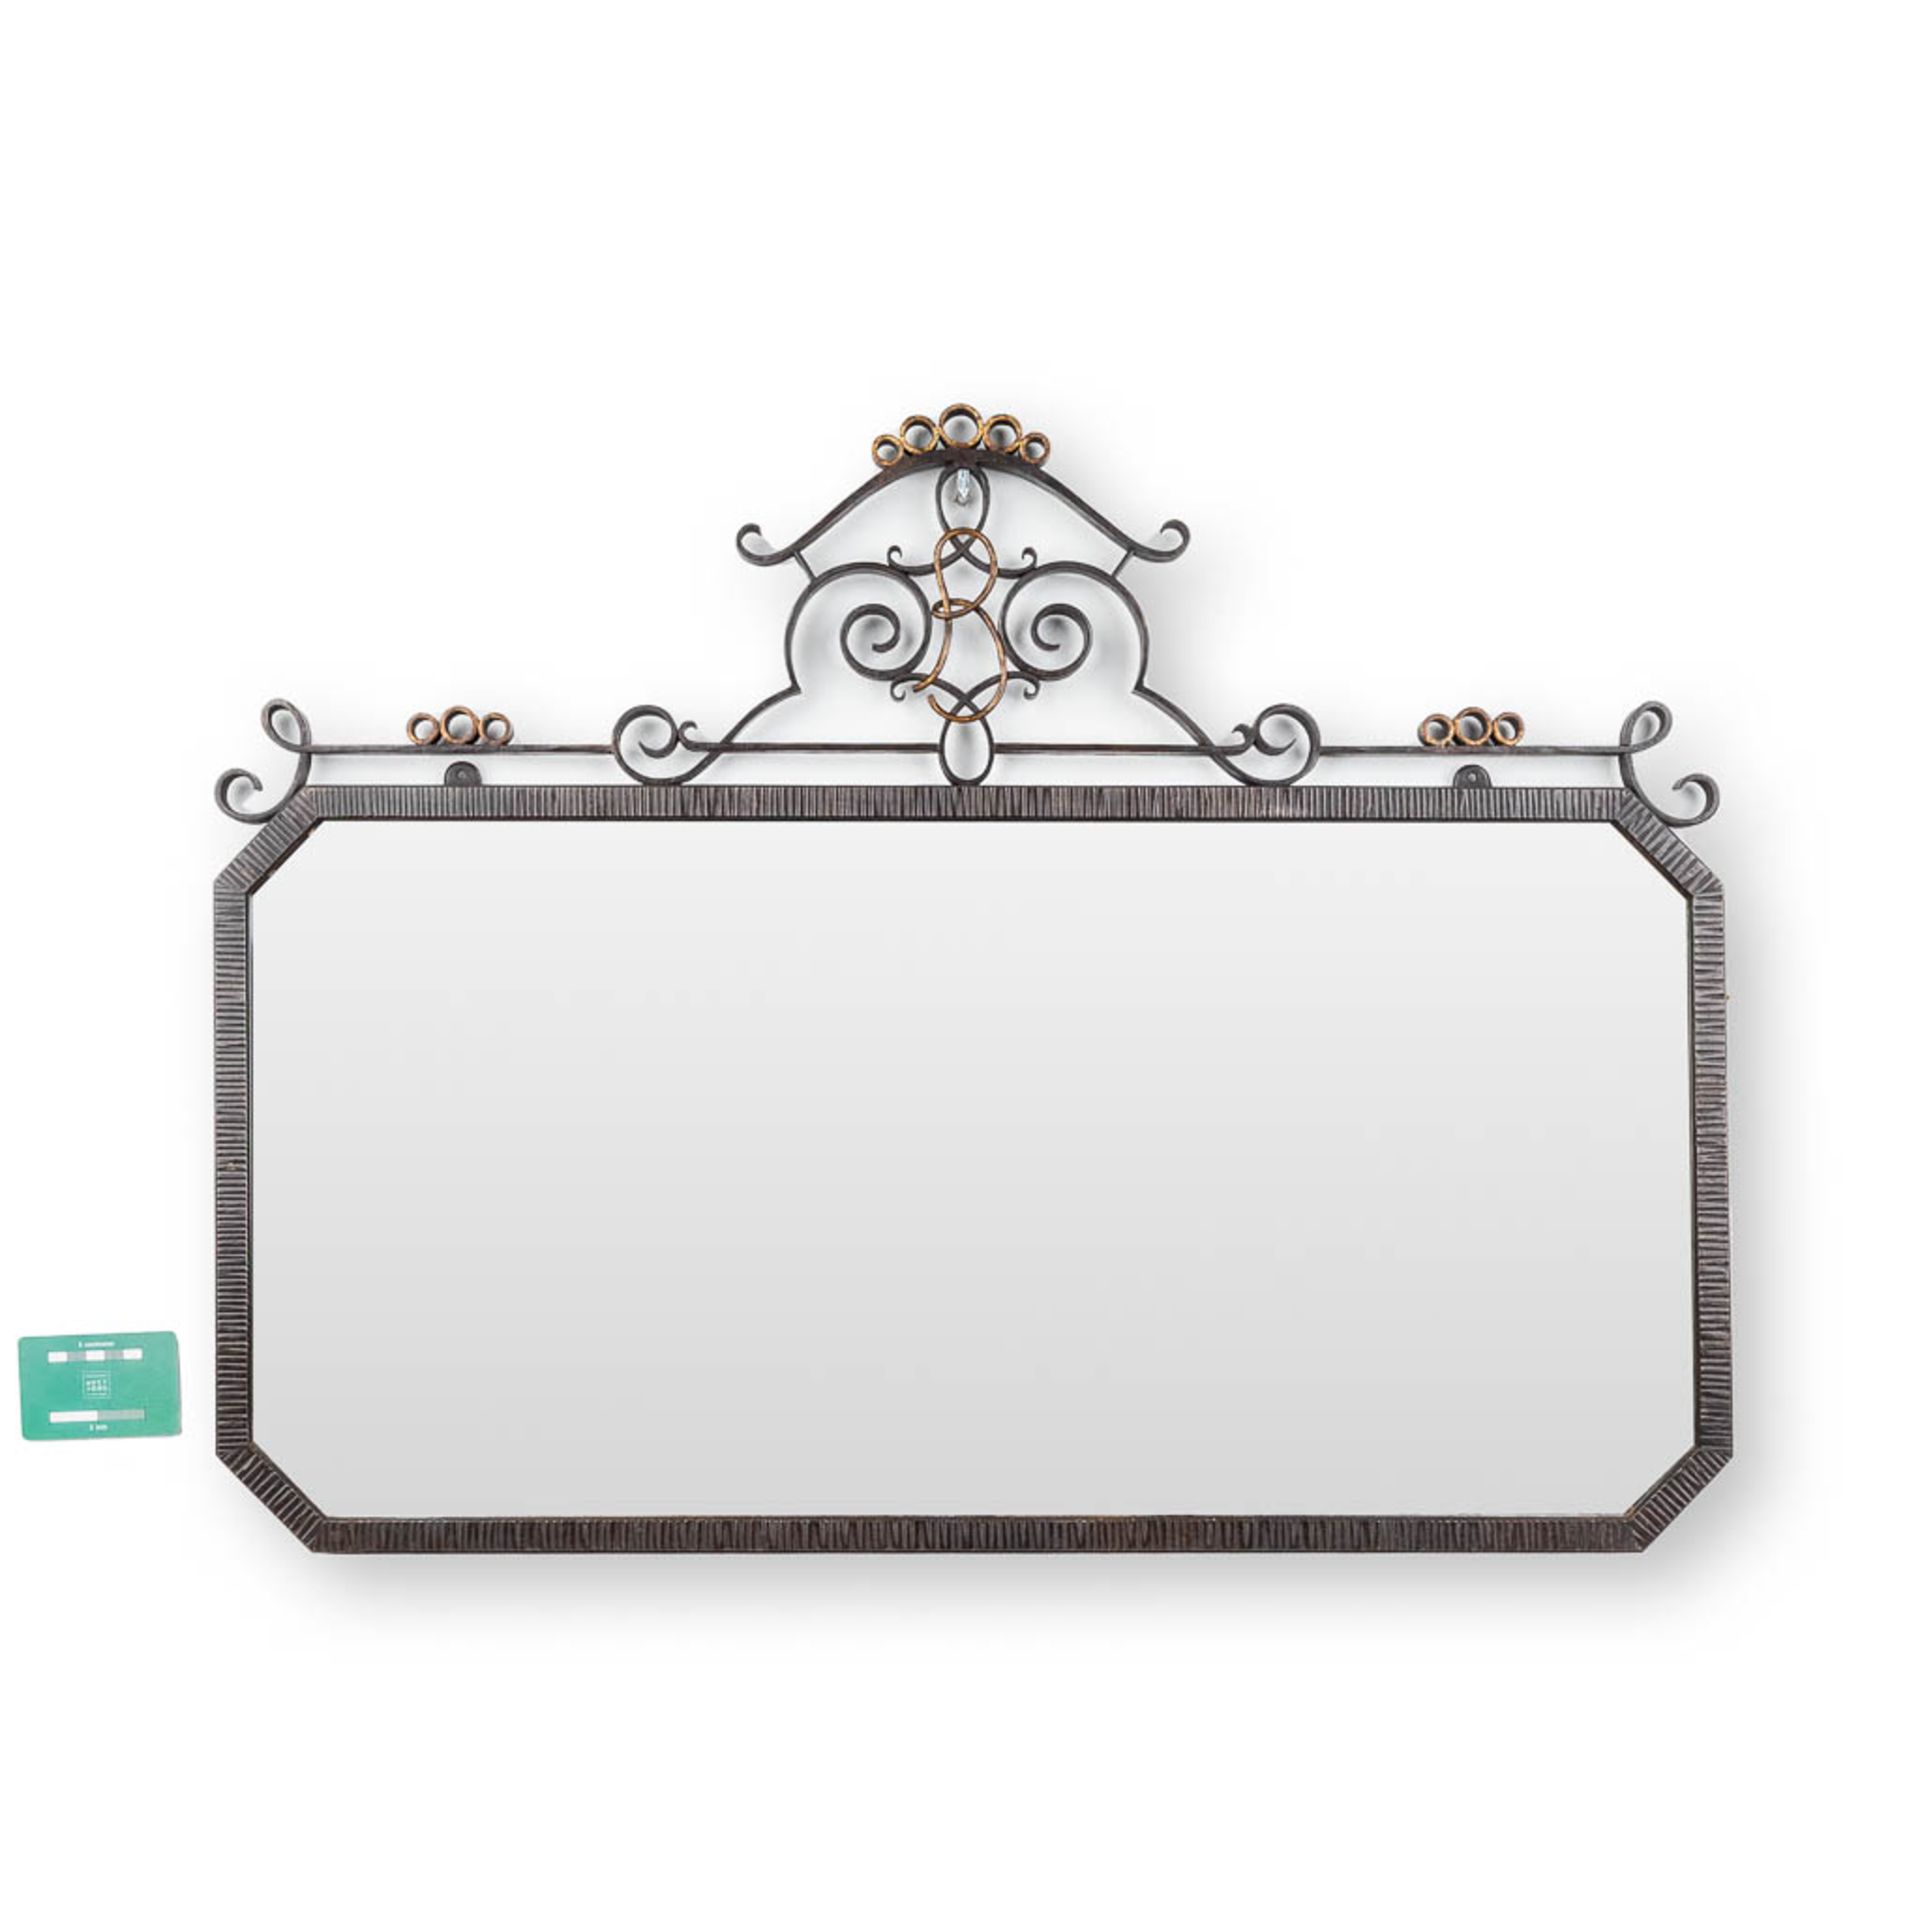 A mirror with a wrought iron frame, circa 1920. (W:80 x H:60 cm) - Image 2 of 7